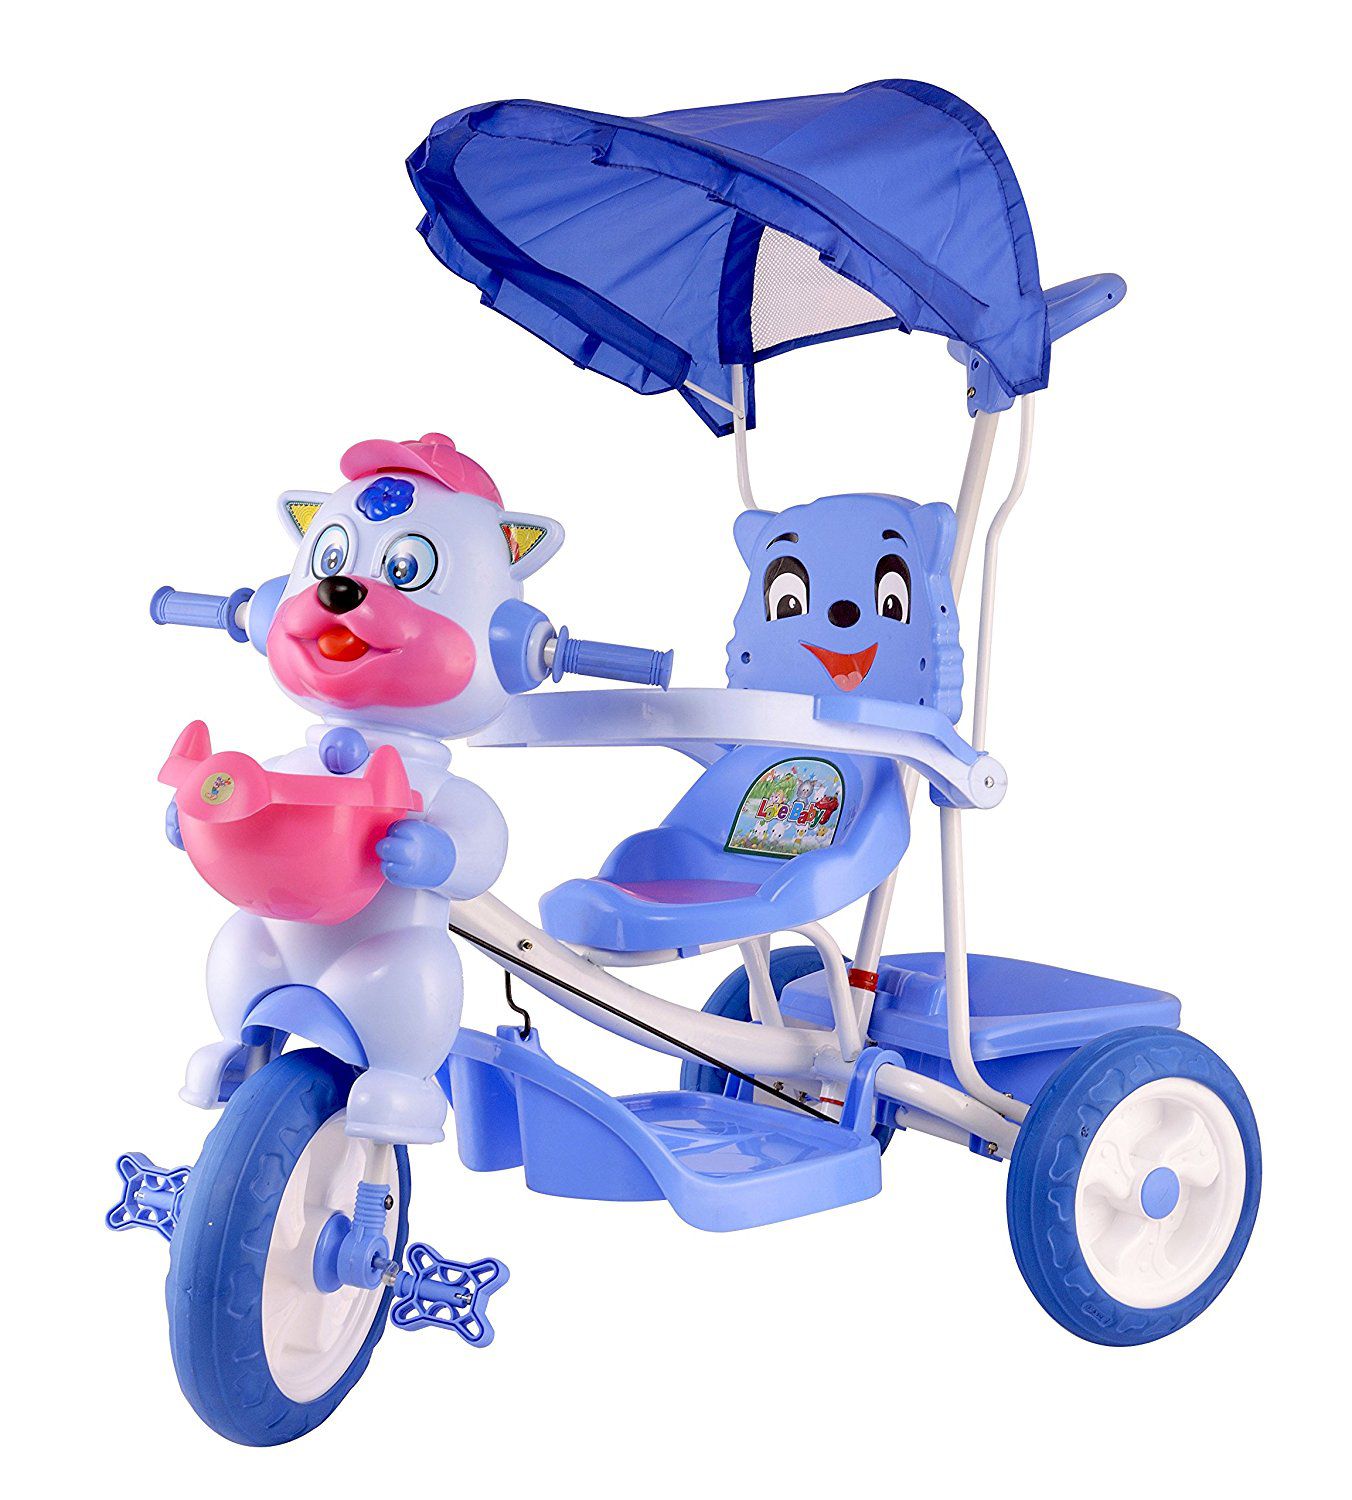 baby tricycle with handle